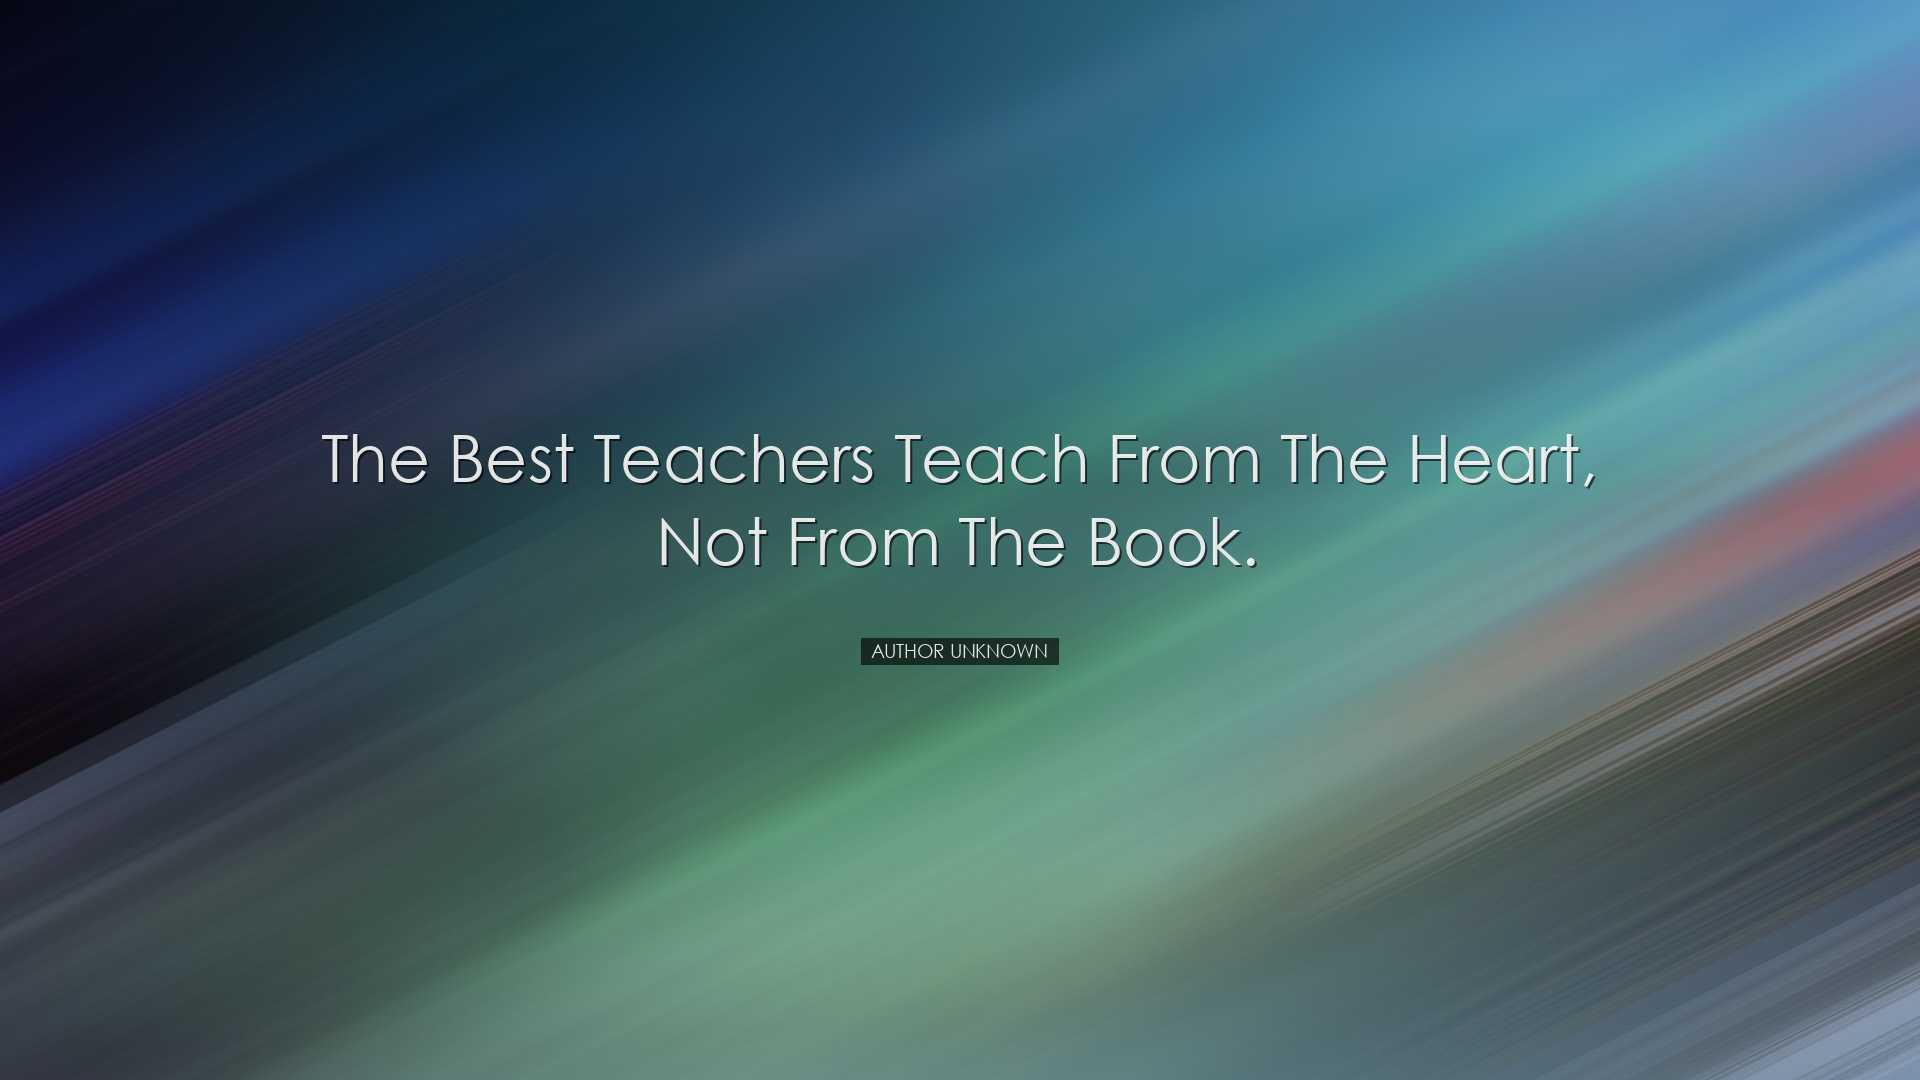 The best teachers teach from the heart, not from the book. - Autho